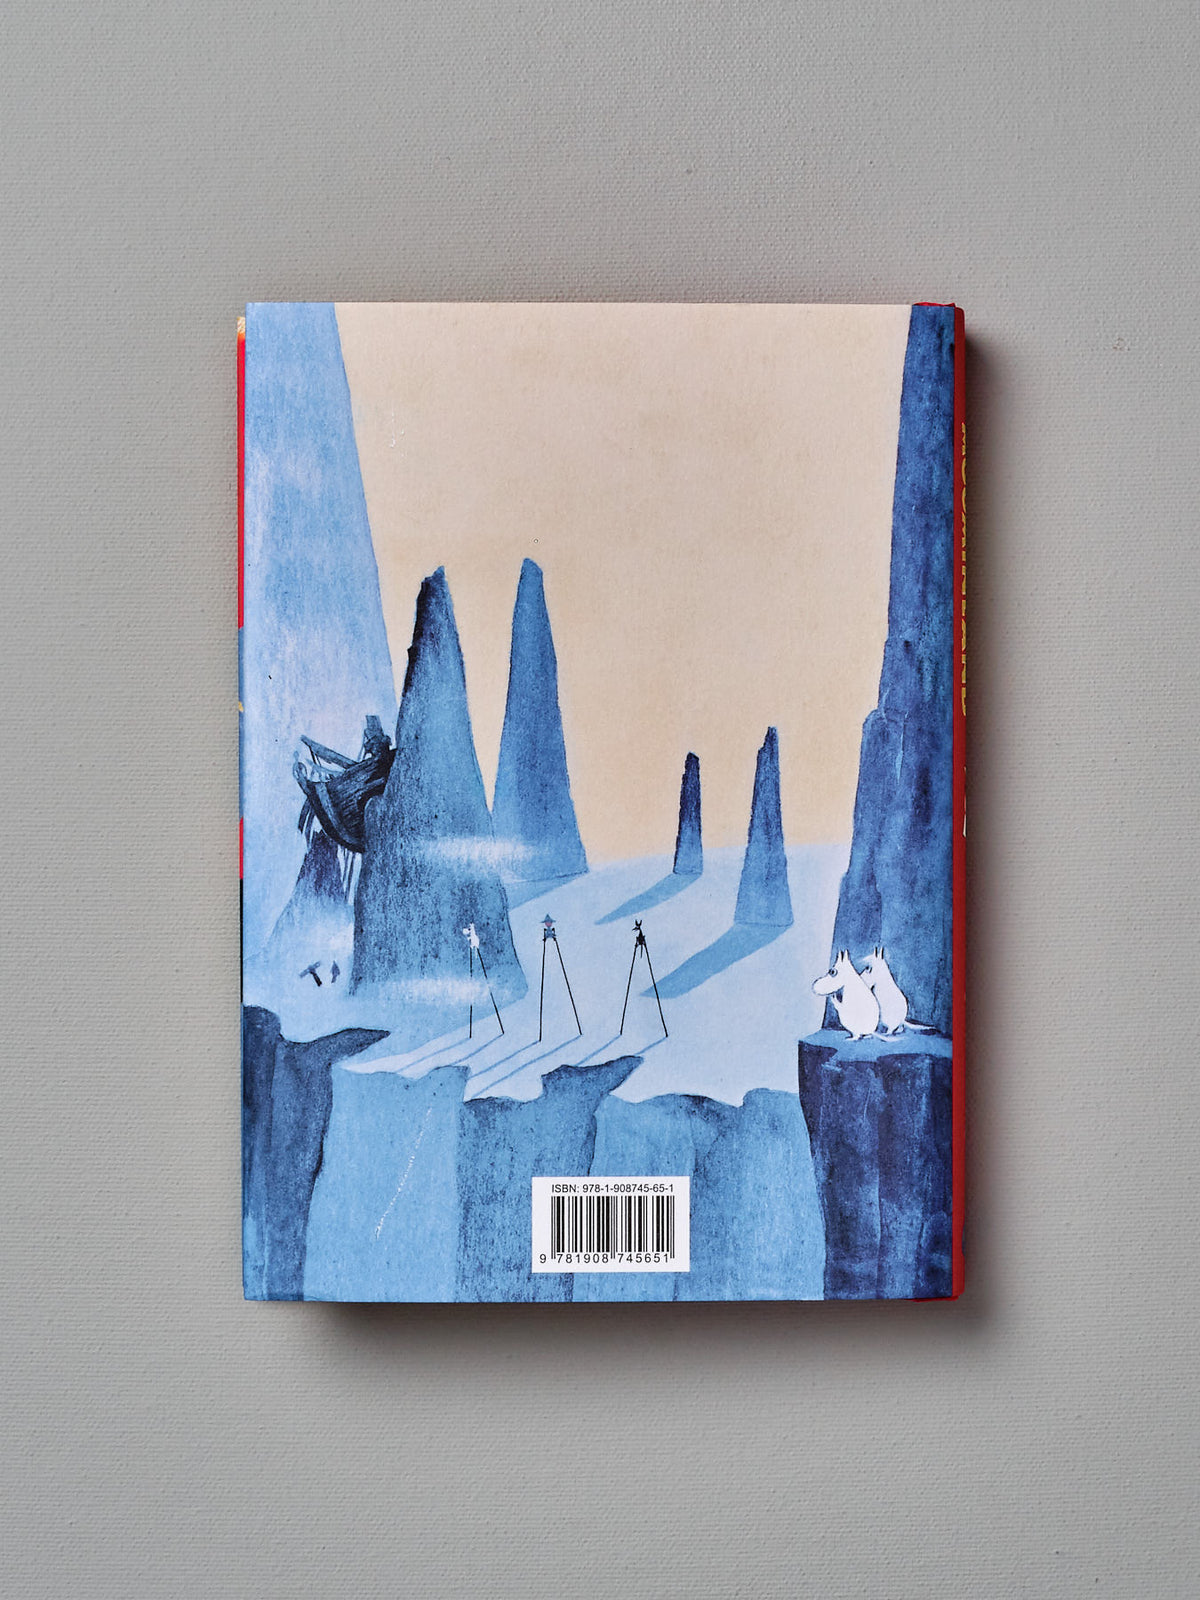 The cover of a children&#39;s book, &quot;Comet in Moominland&quot; by Tove Jansson, with a blue cover.